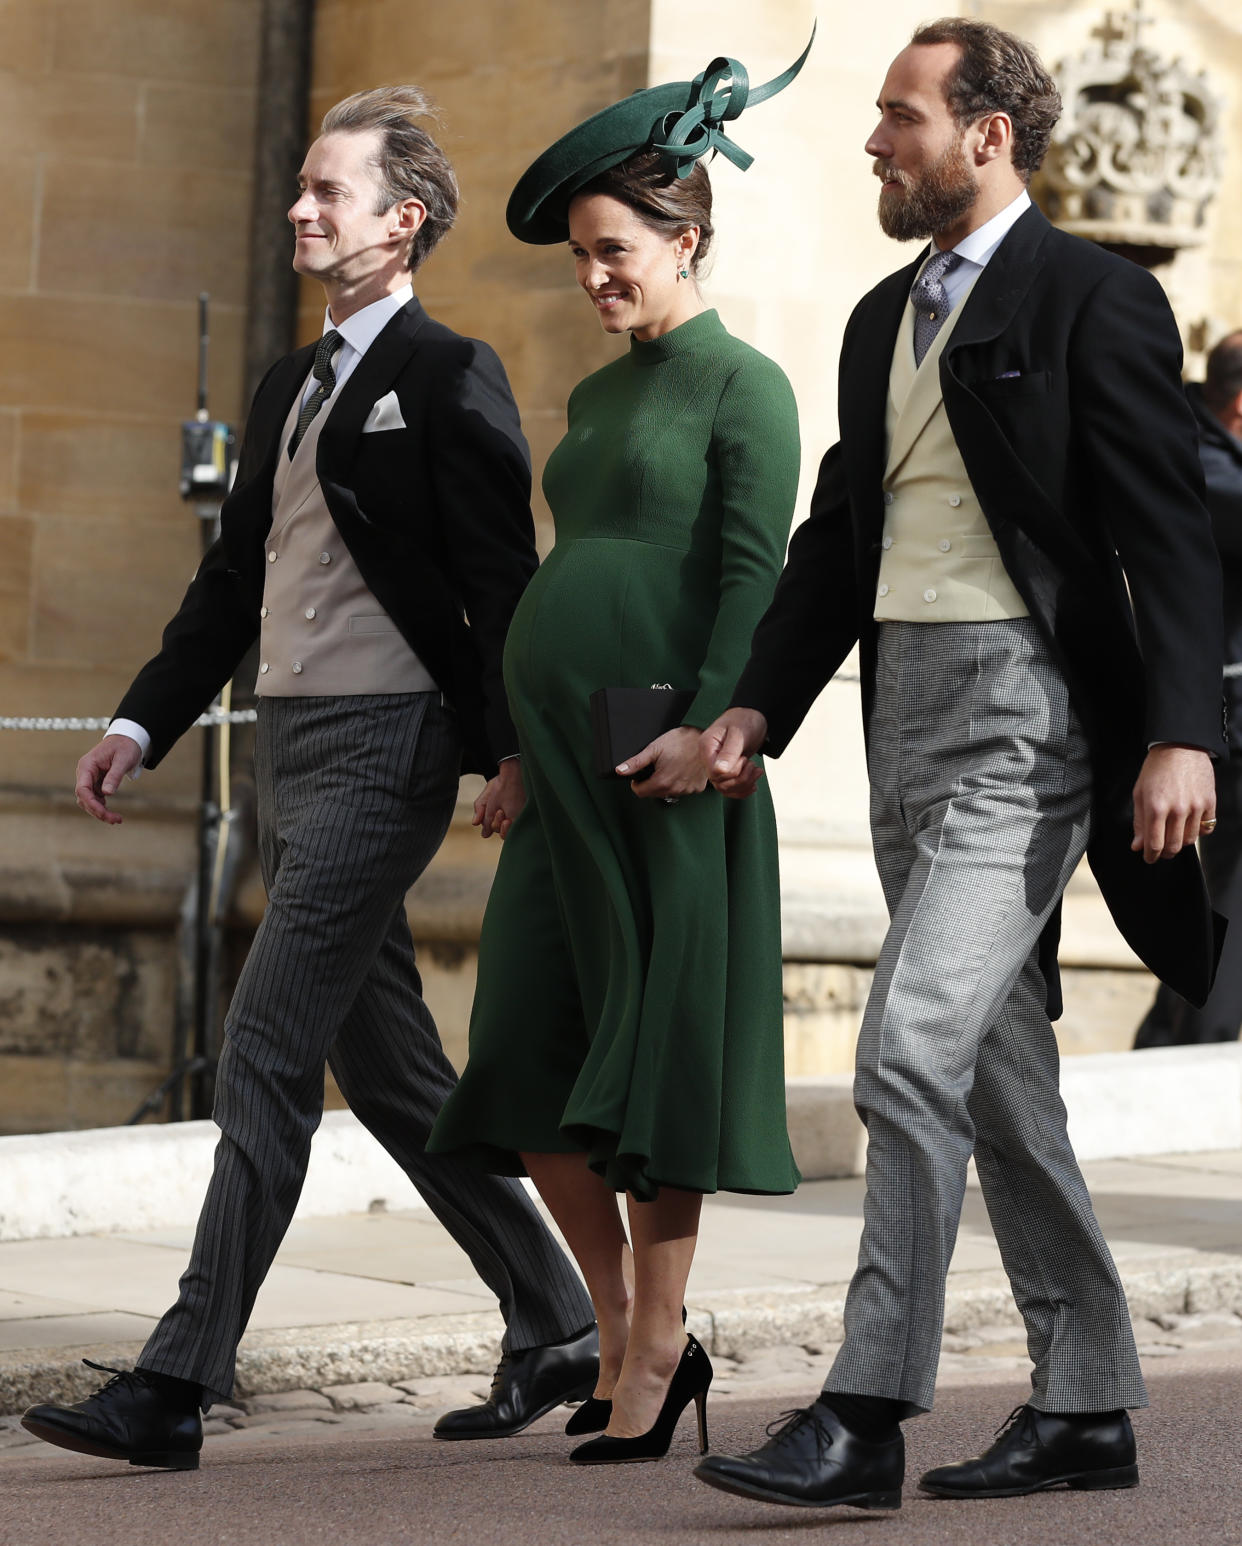 James Middleton, Pippa Middleton, and James Matthews arrive for the wedding of Princess Eugenie of York and Jack Brooksbank at St. George’s Chapel, Windsor Castle, Oct. 12, 2018. (Photo: Alastair Grant/WPA Pool/Getty Images)